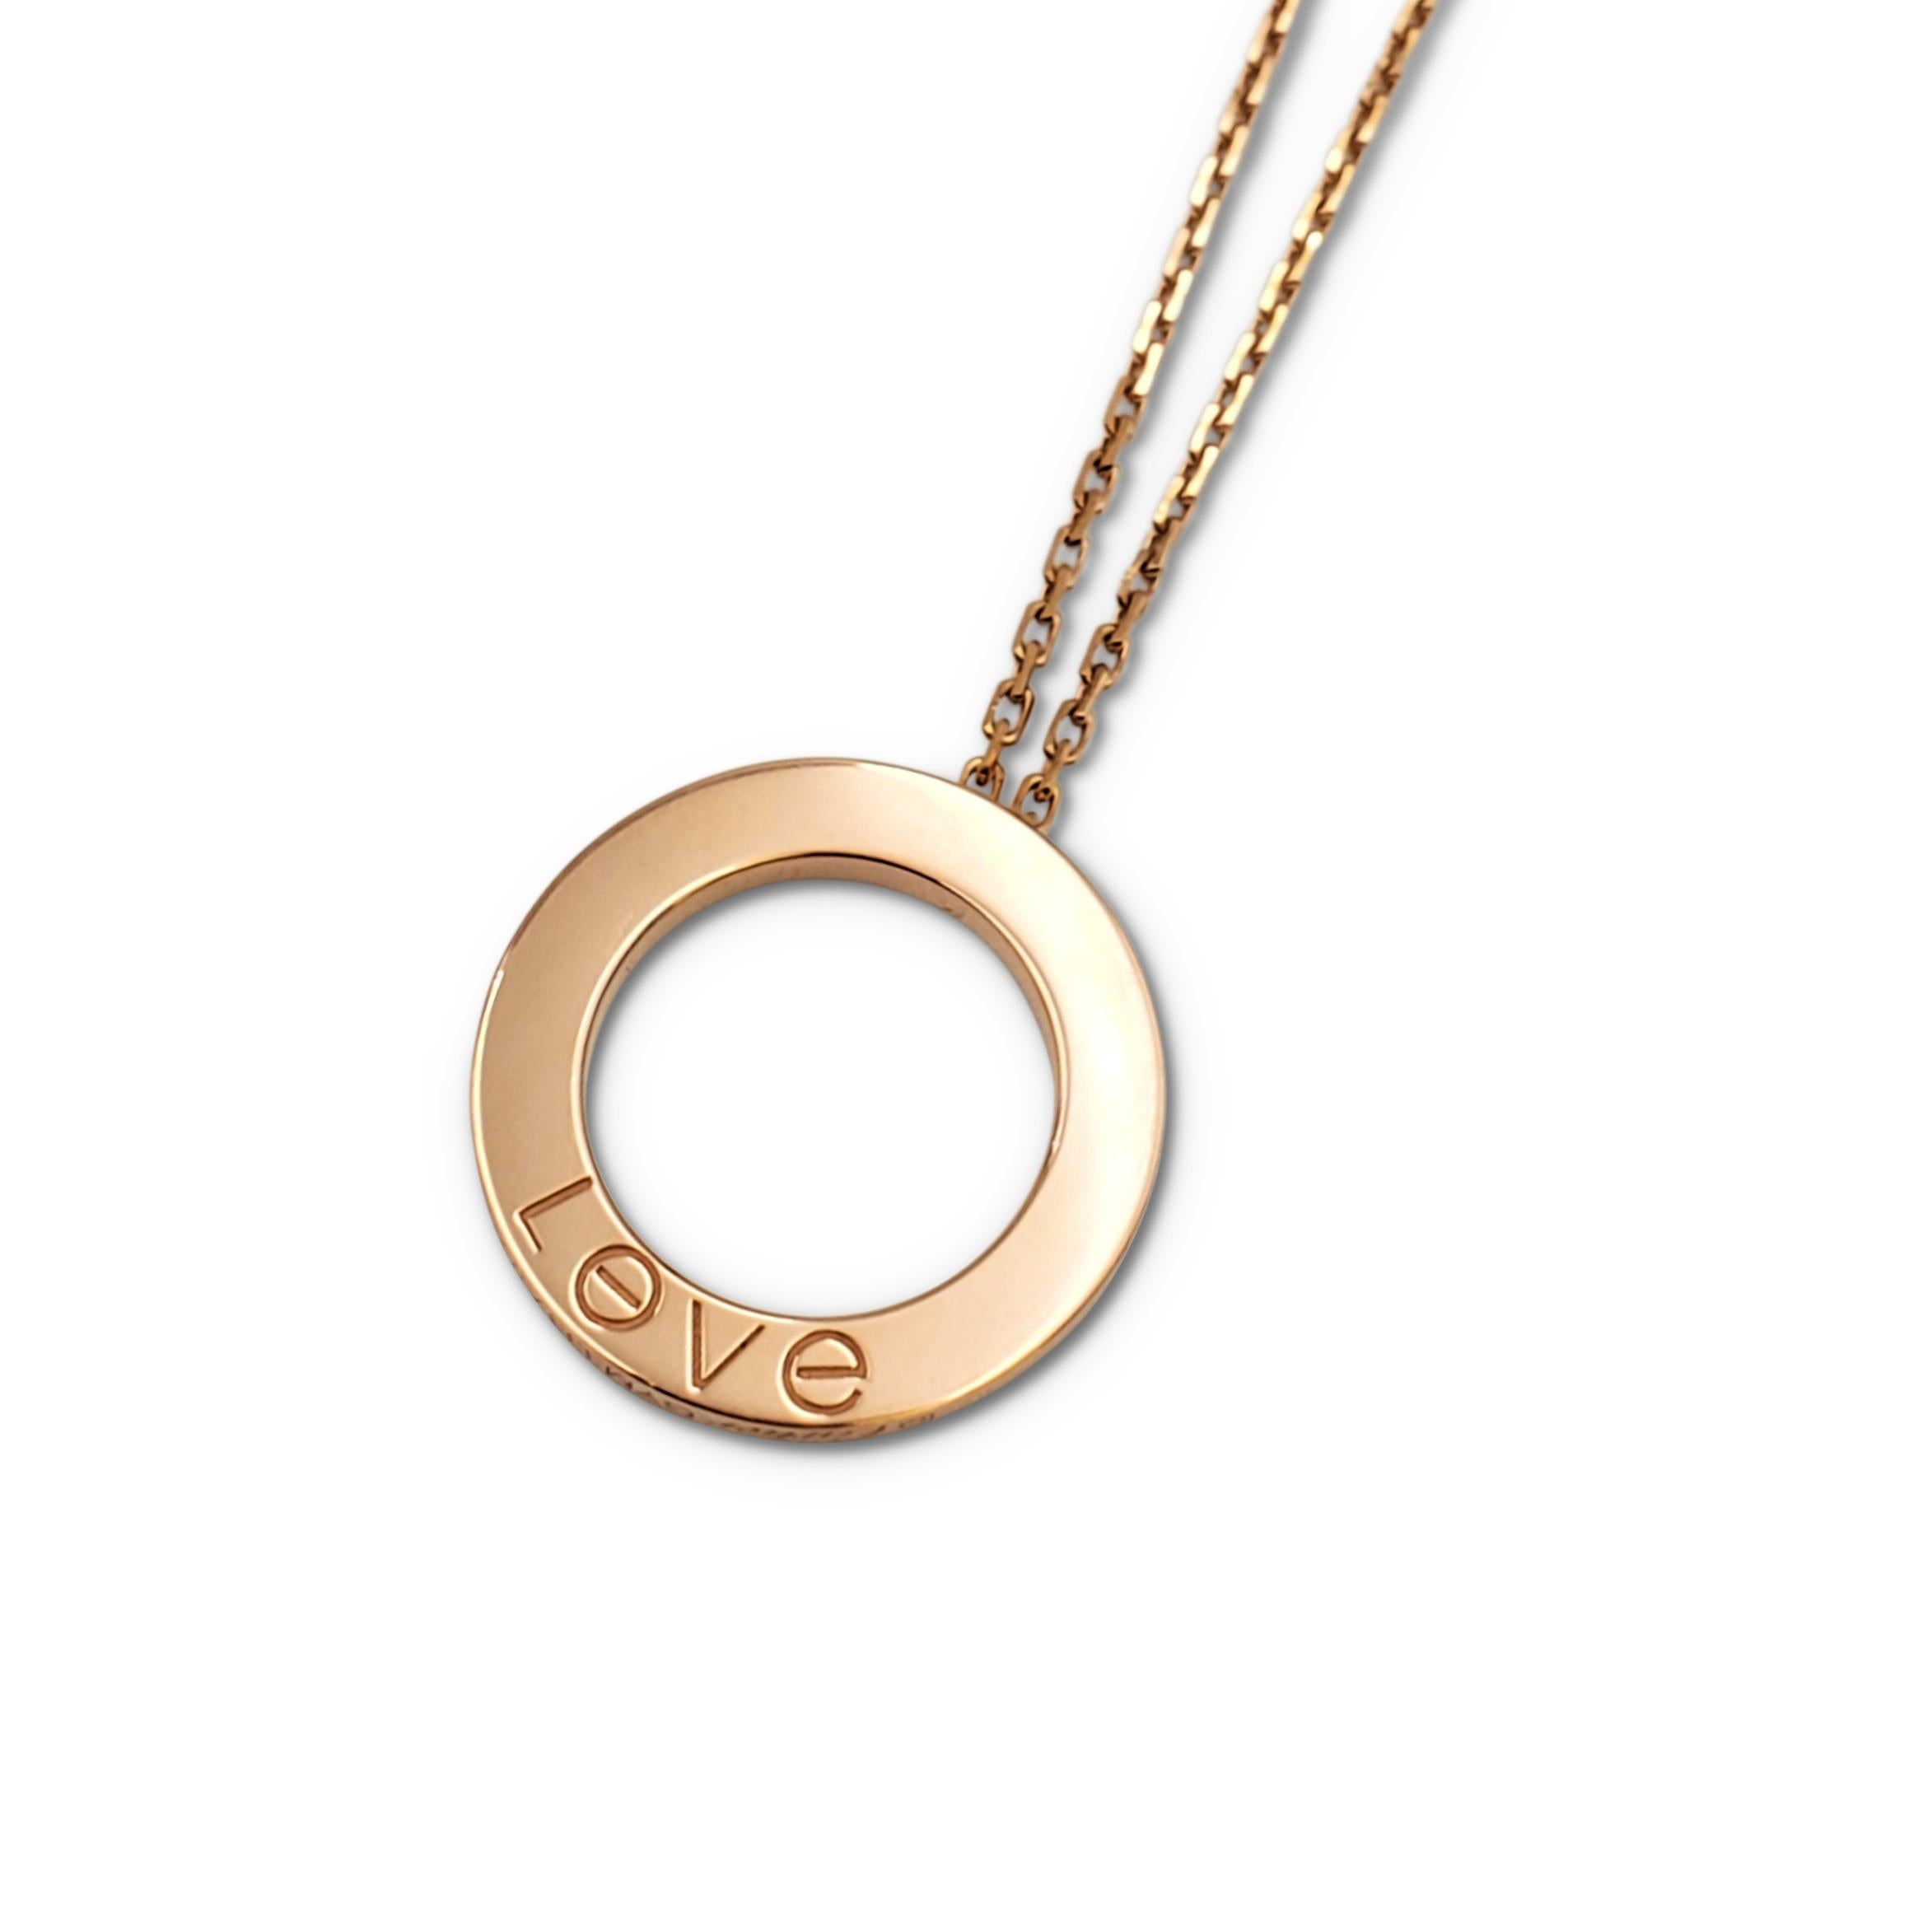 Cartier 'Love' Rose Gold 3-Diamond Circle Charm Necklace 1